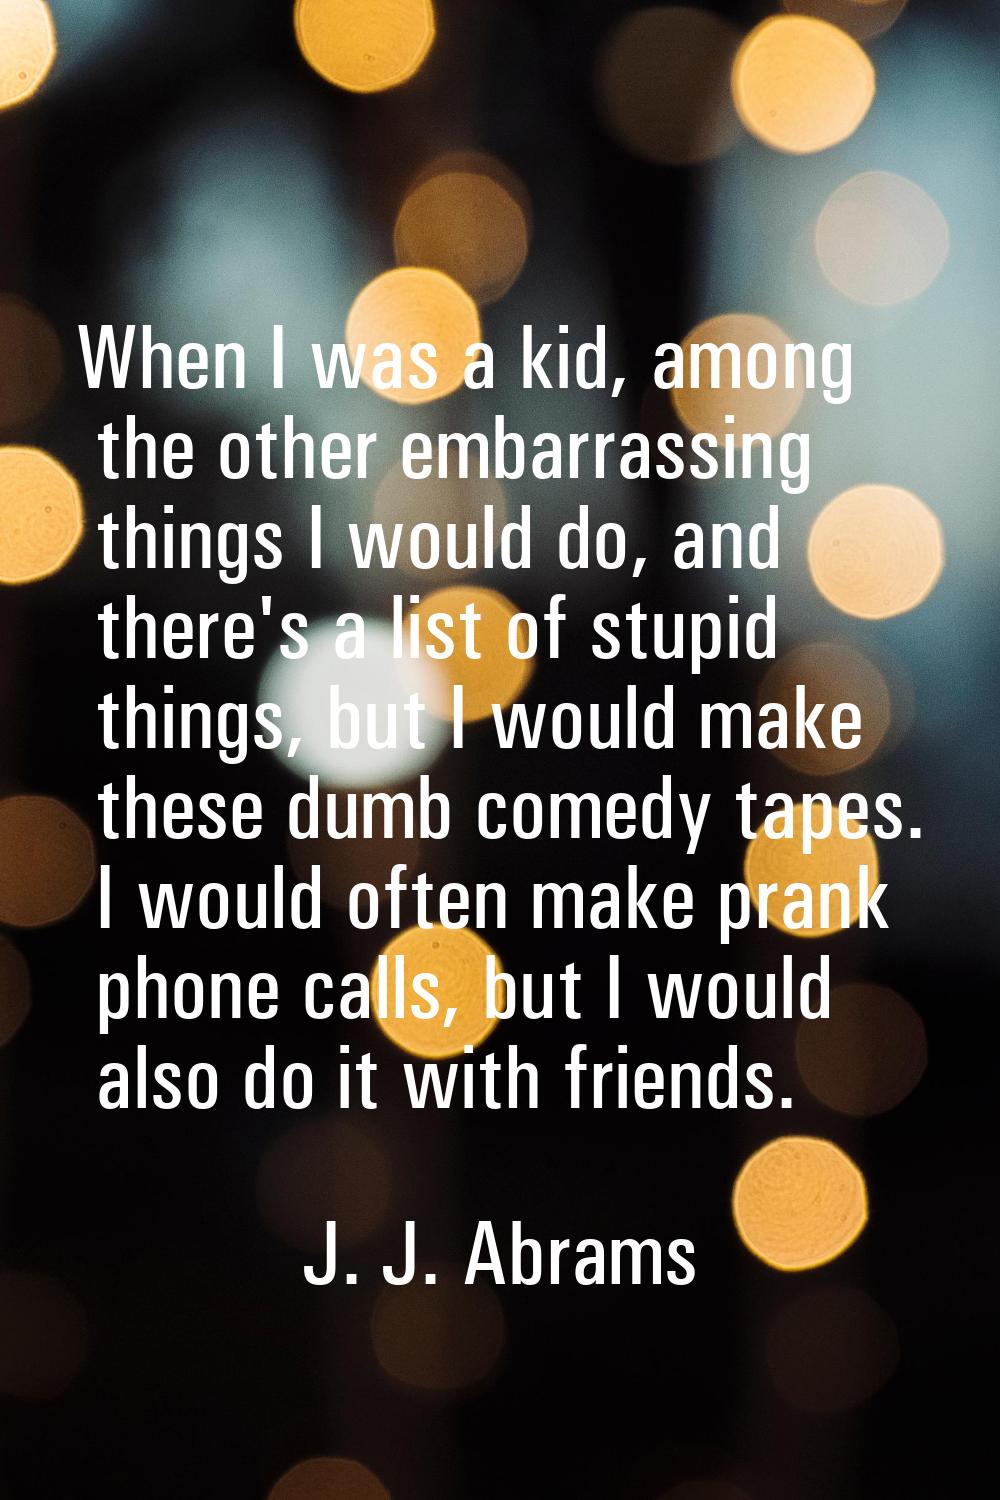 When I was a kid, among the other embarrassing things I would do, and there's a list of stupid thin